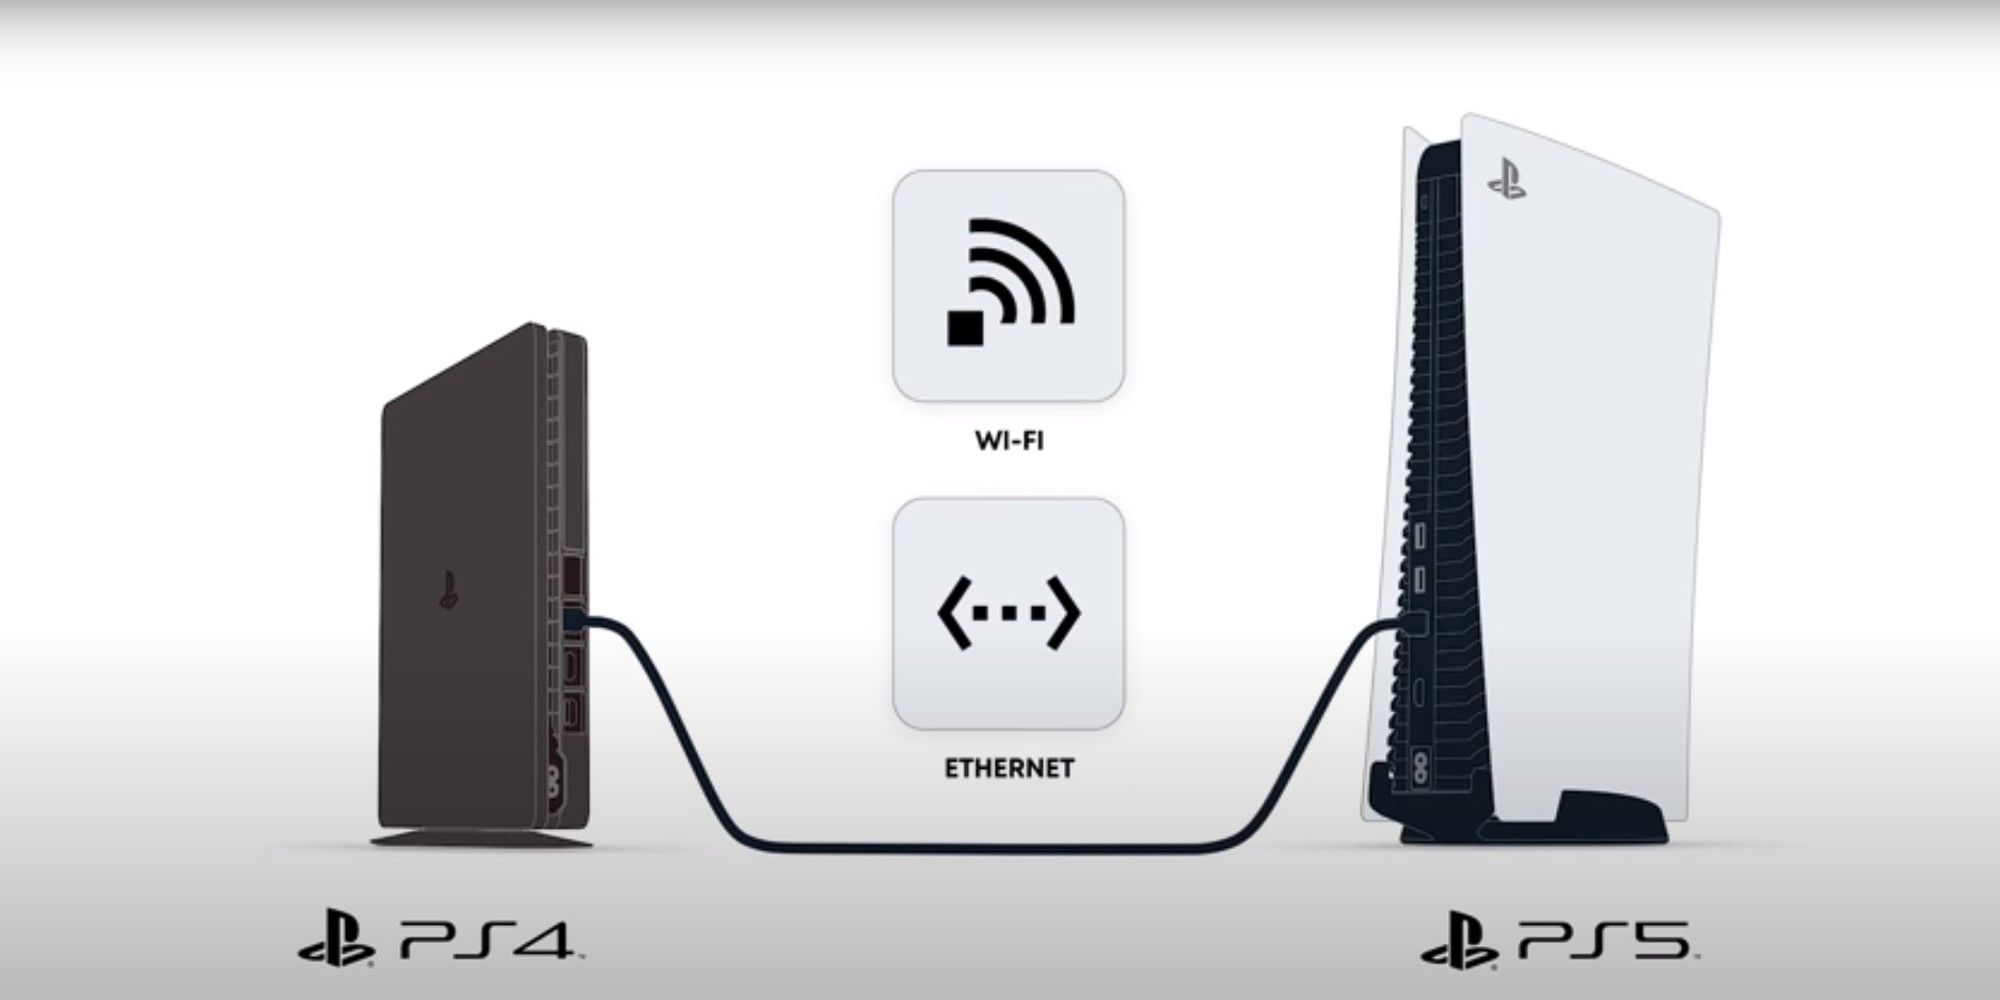 Transferring games and saves from PlayStation 4 to PlayStation 5 requires a WiFi connection and, optionally, an ethernet cable